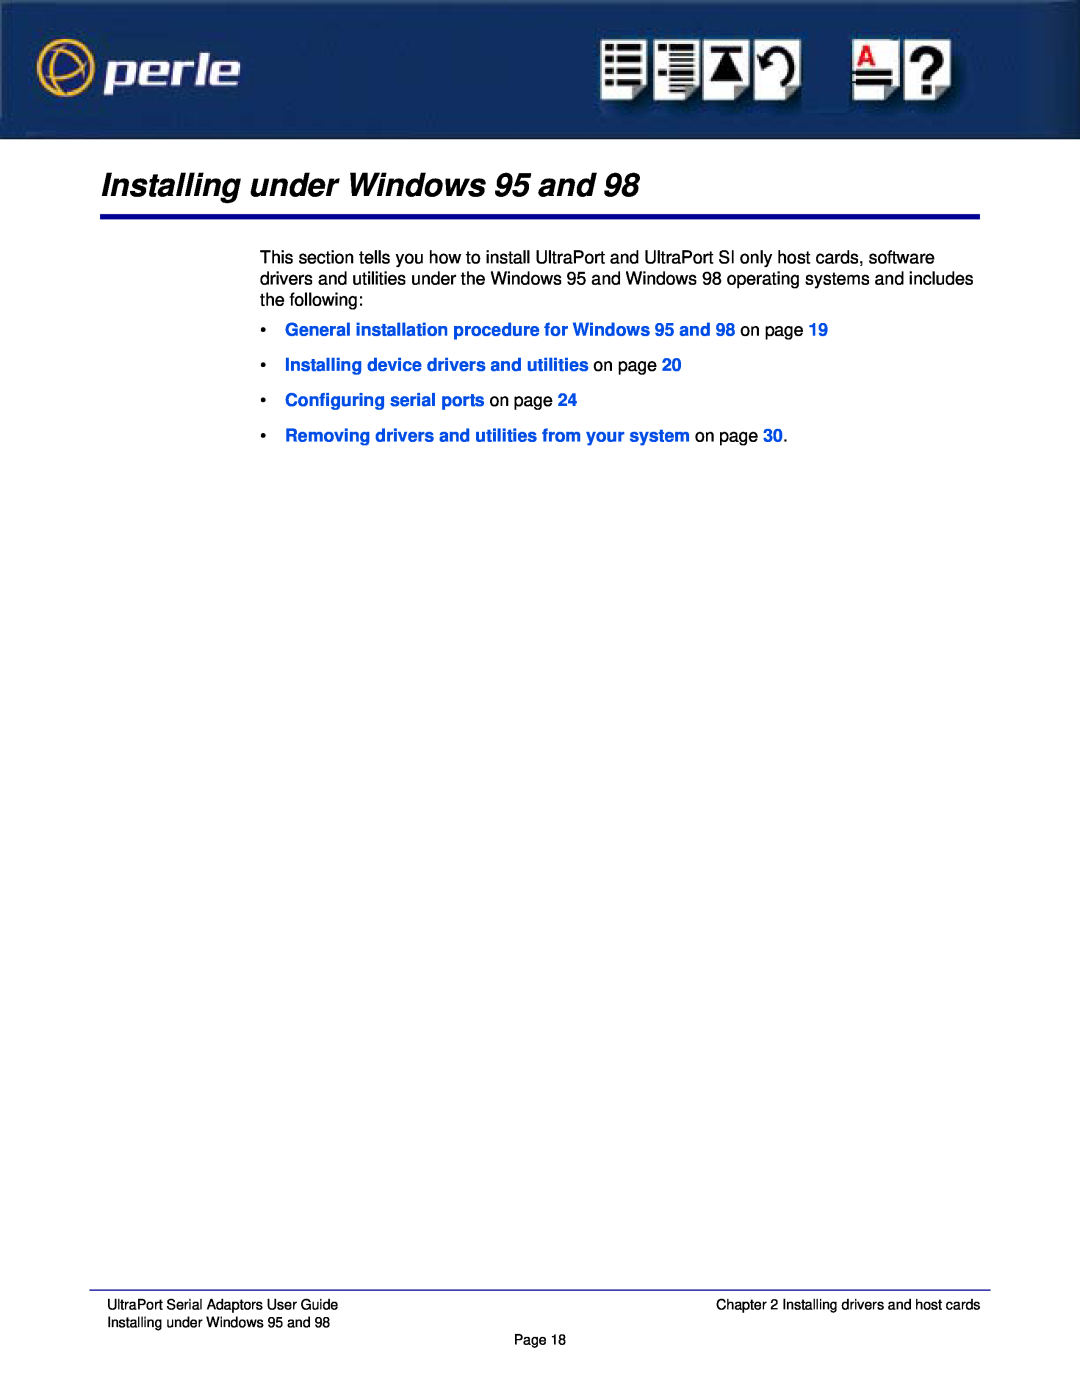 Perle Systems 5500152-23 Installing under Windows 95 and, General installation procedure for Windows 95 and 98 on page 